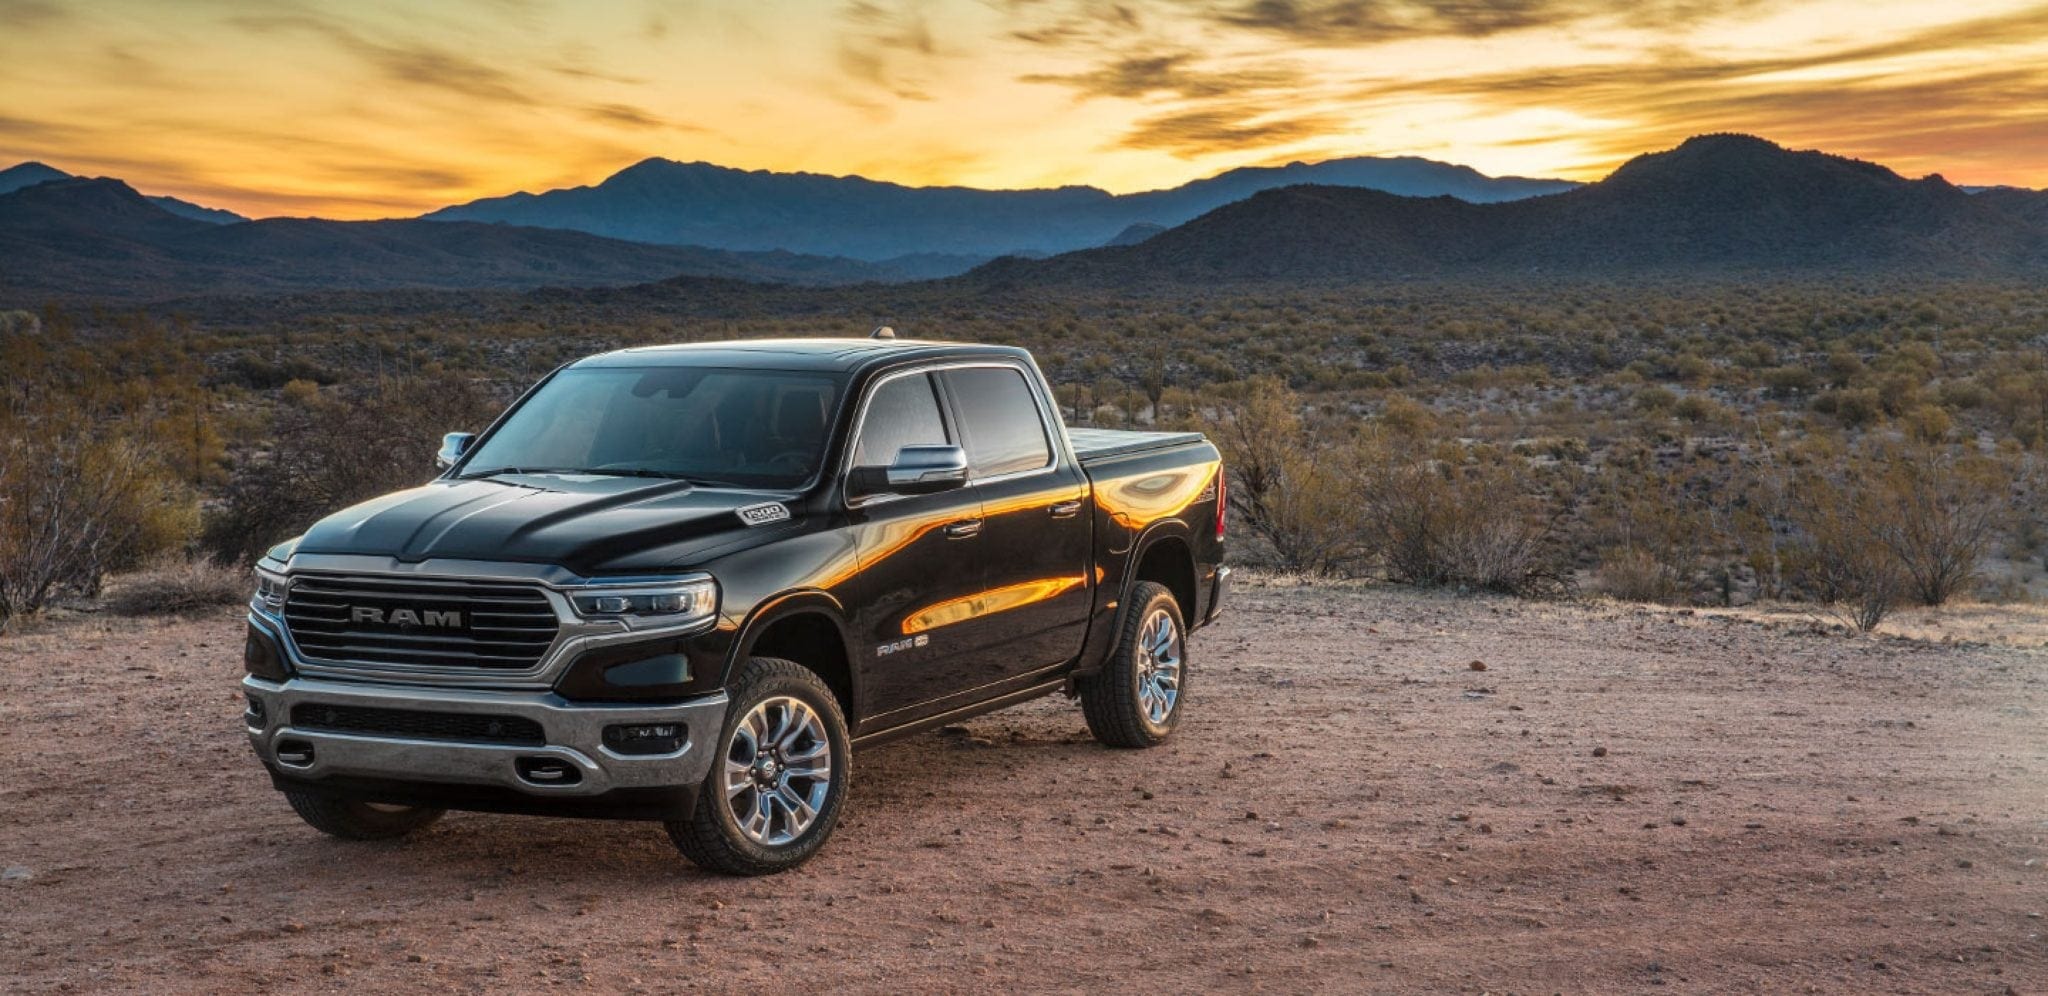 Black 2019 Ram 1500 Laramie with plains and mountains against a vibrant yellow sunset